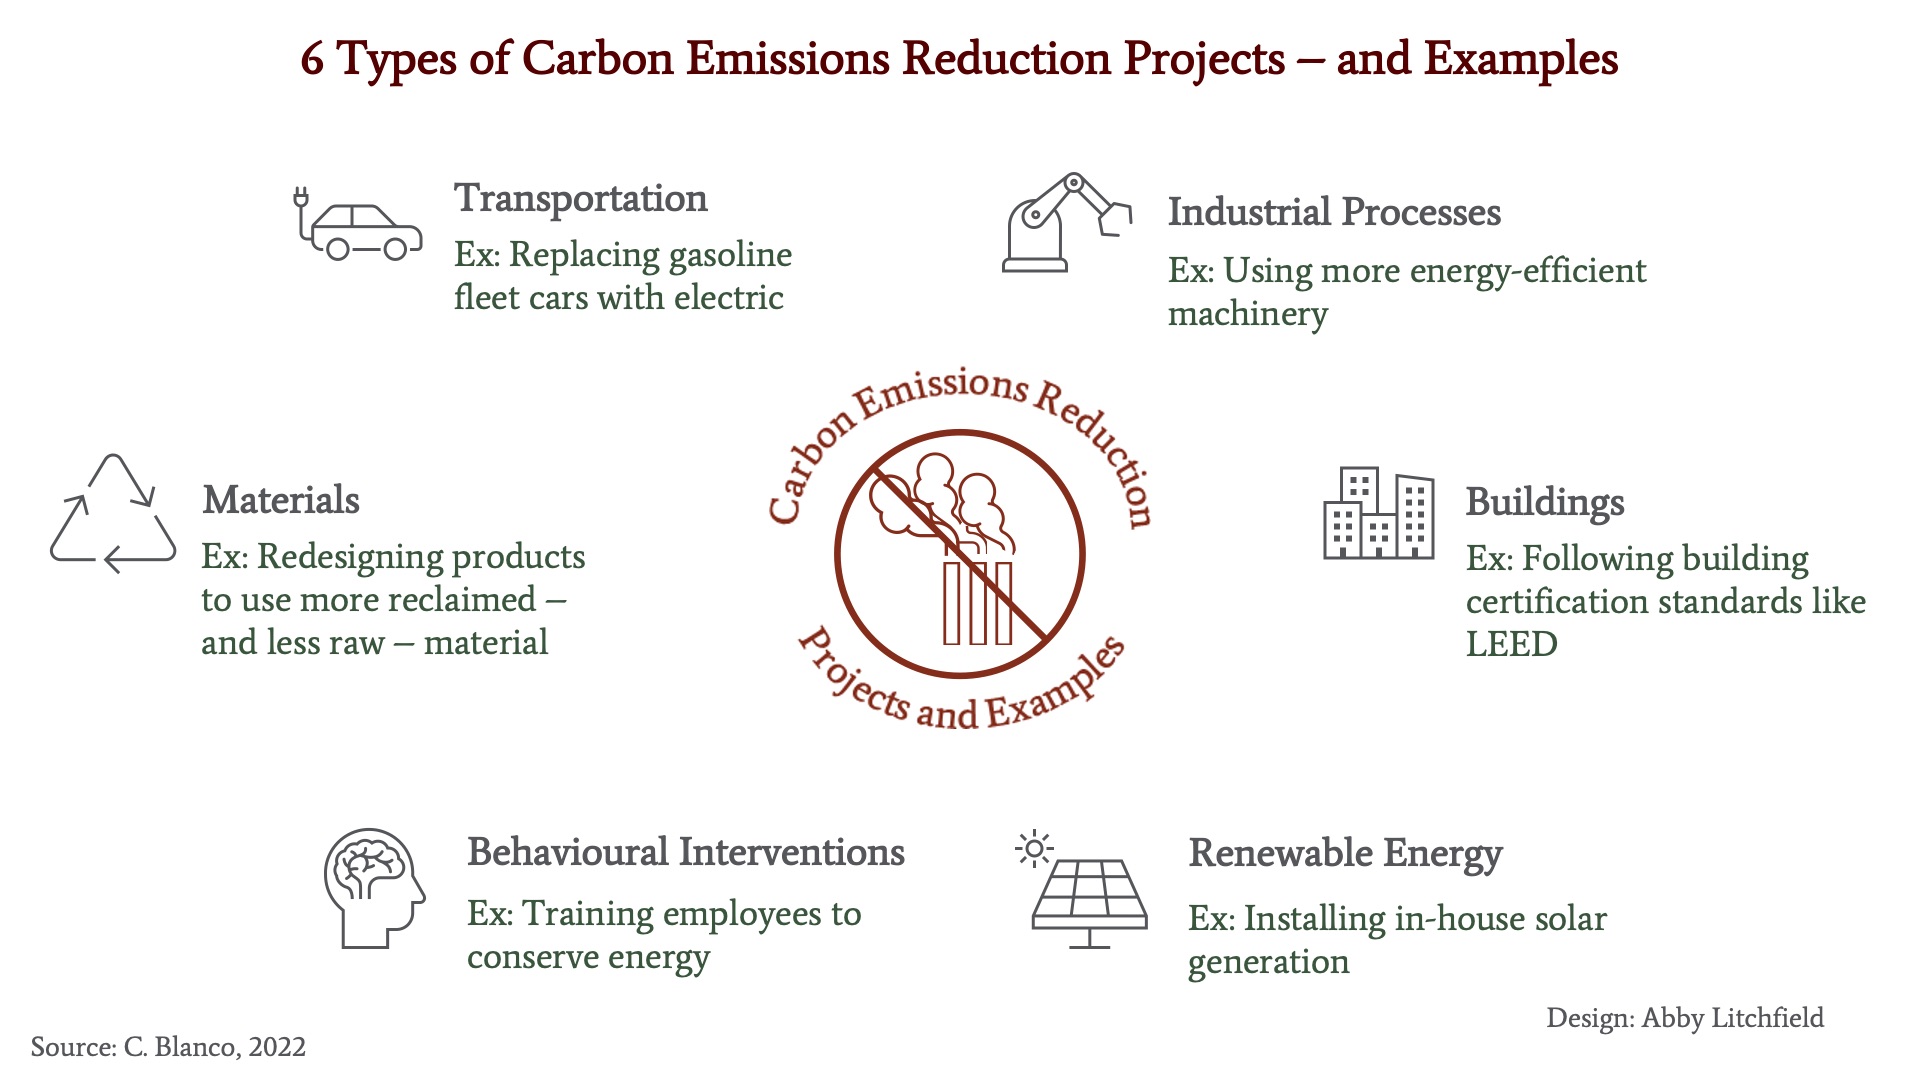 Companies can reduce their carbon emissions through key areas of industrial processes, buildings, renewable energy, behavioural interventions, materials, and transportation.